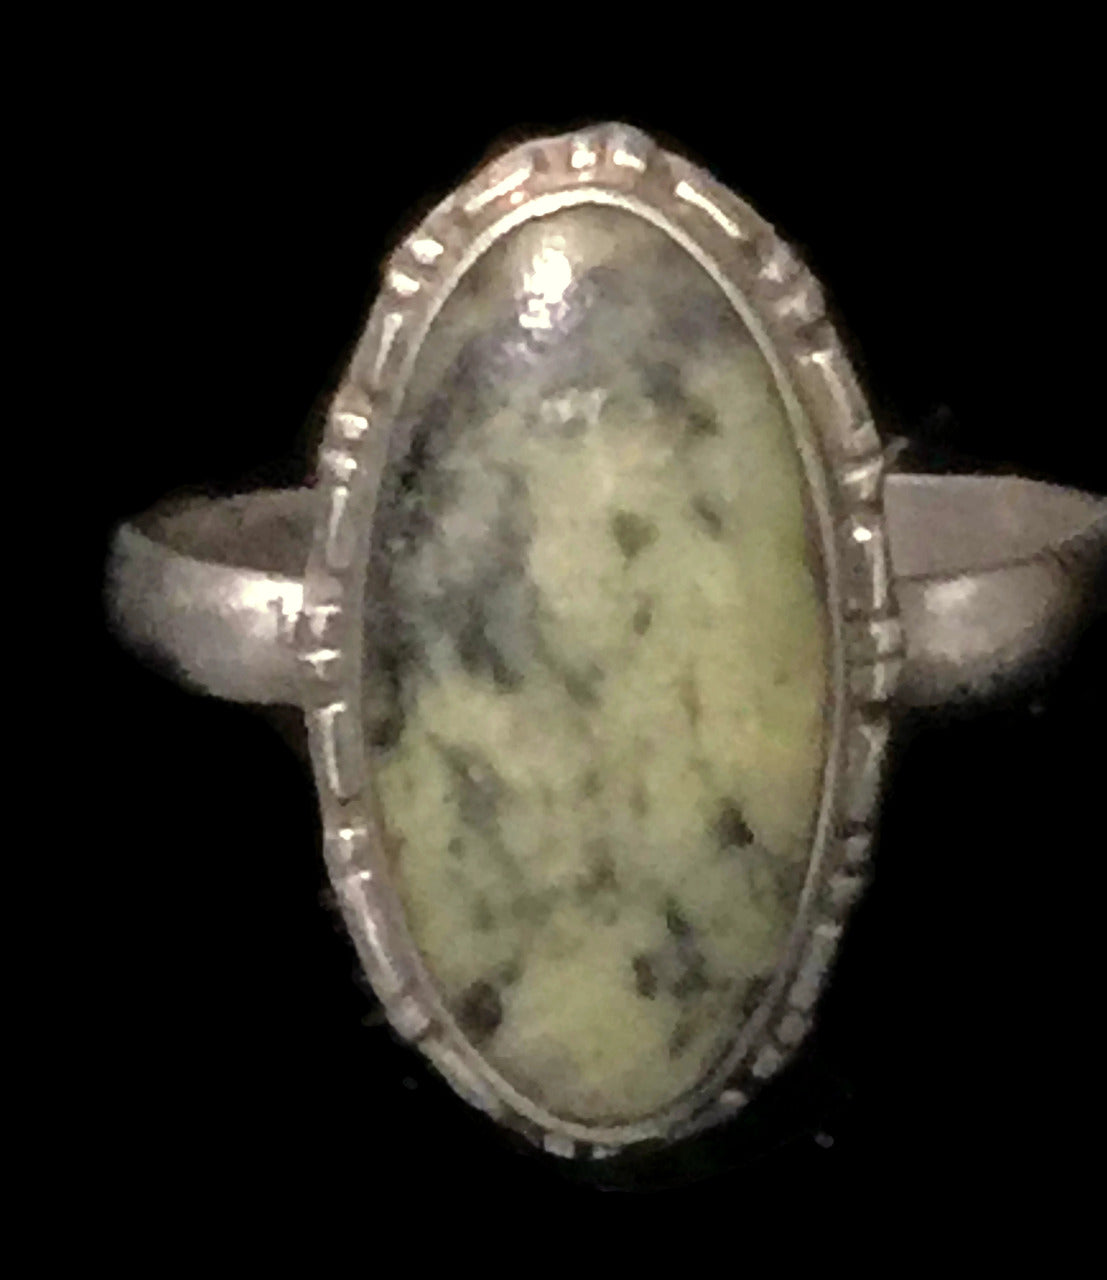 Green Agate Ring Southwest Sterling Silver Size 7.25